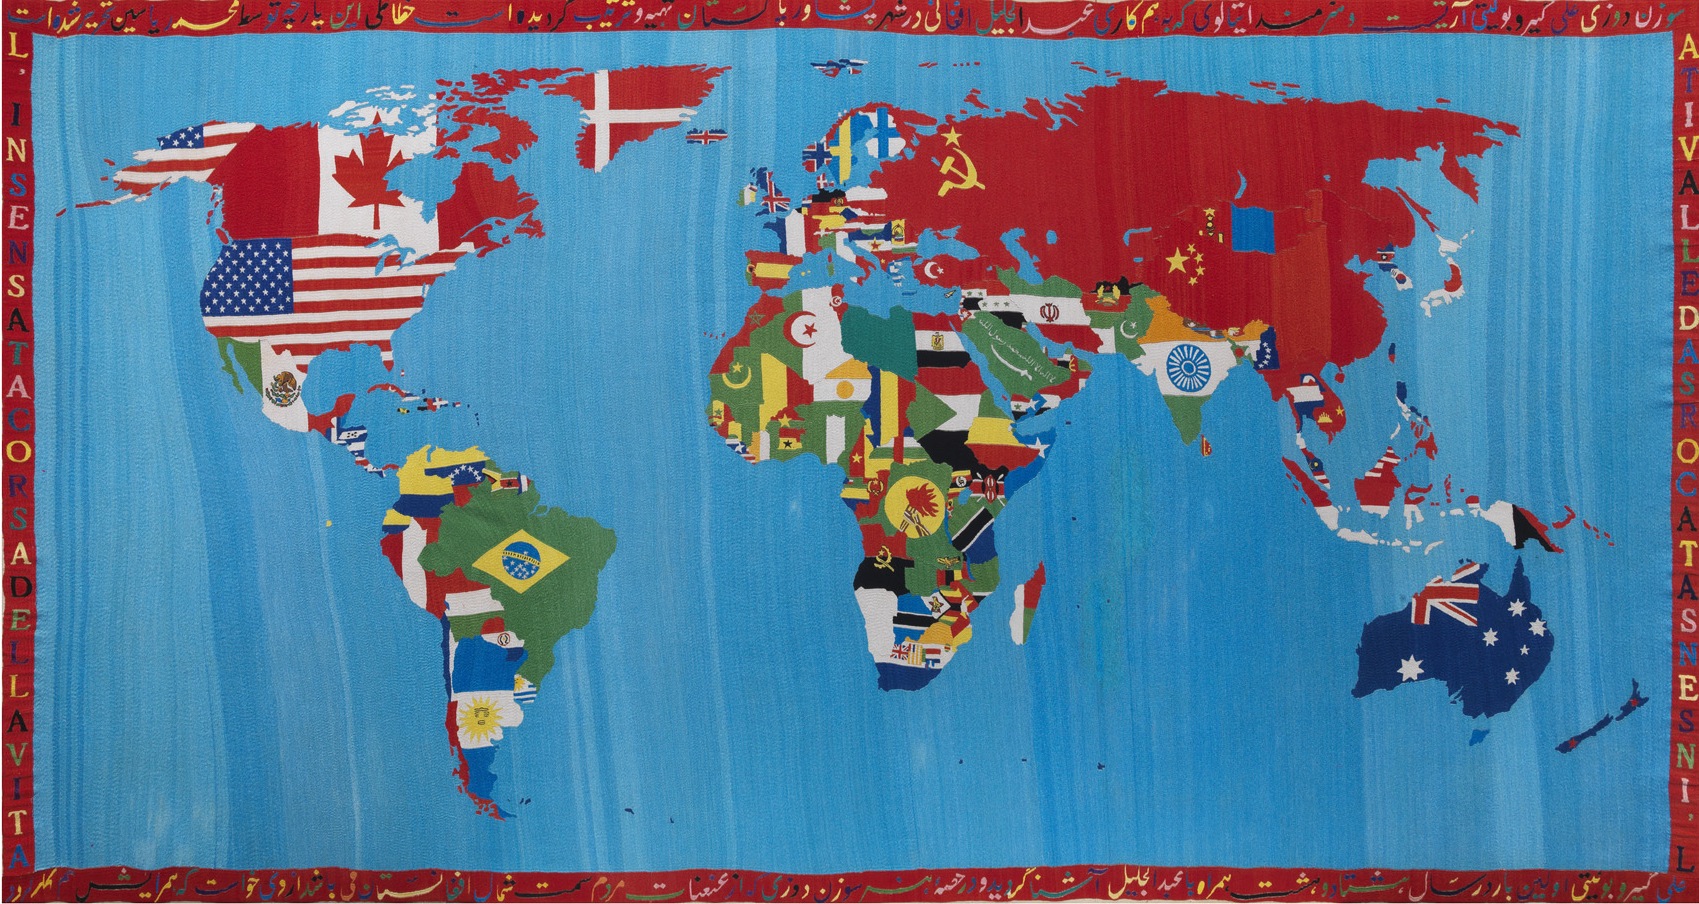 Alighiero Boetti, life, style and works of the exponent of Arte Povera